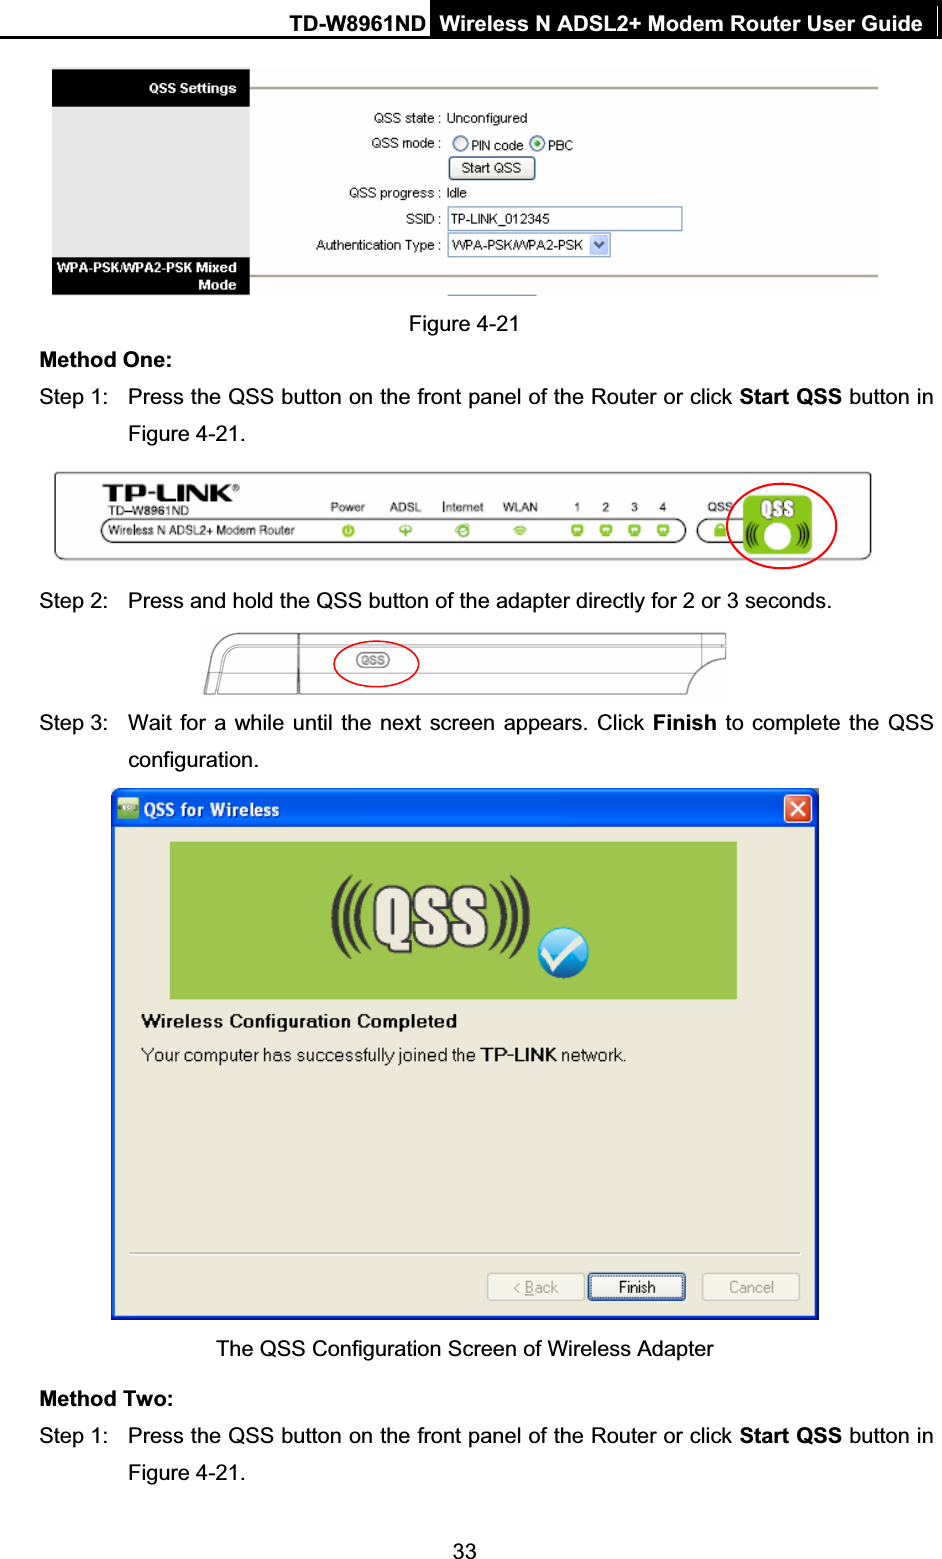 TD-W8961ND Wireless N ADSL2+ Modem Router User Guide33Figure 4-21 Method One: Step 1:  Press the QSS button on the front panel of the Router or click Start QSS button in Figure 4-21.Step 2:  Press and hold the QSS button of the adapter directly for 2 or 3 seconds. Step 3:  Wait for a while until the next screen appears. Click Finish to complete the QSS configuration. The QSS Configuration Screen of Wireless Adapter   Method Two: Step 1:  Press the QSS button on the front panel of the Router or click Start QSS button in Figure 4-21.